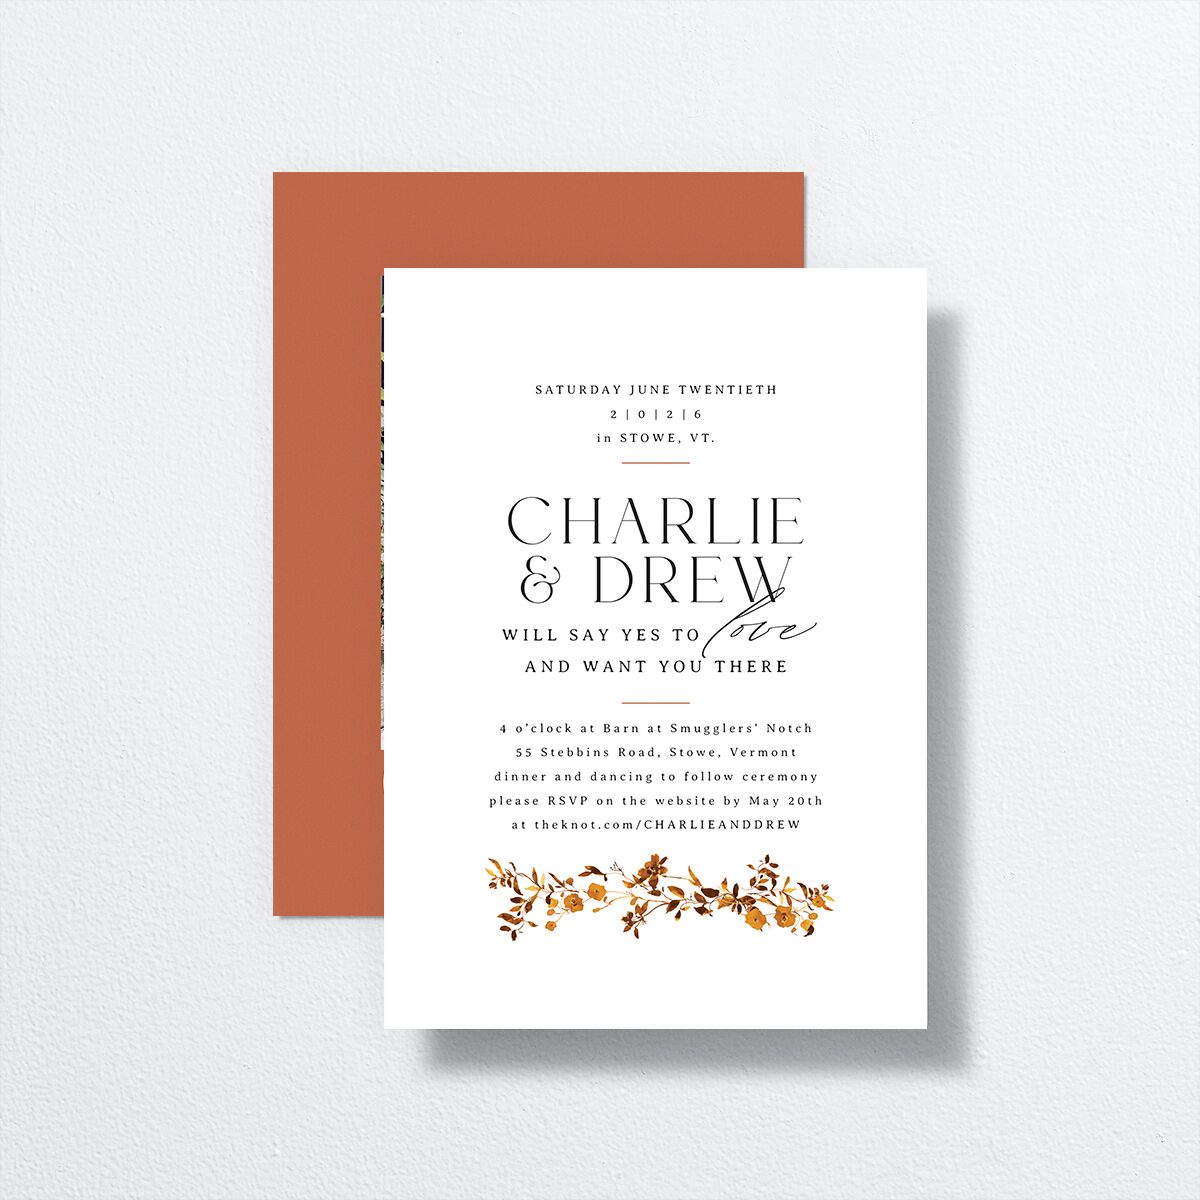 Simple Vine Wedding Invitations front-and-back in orange